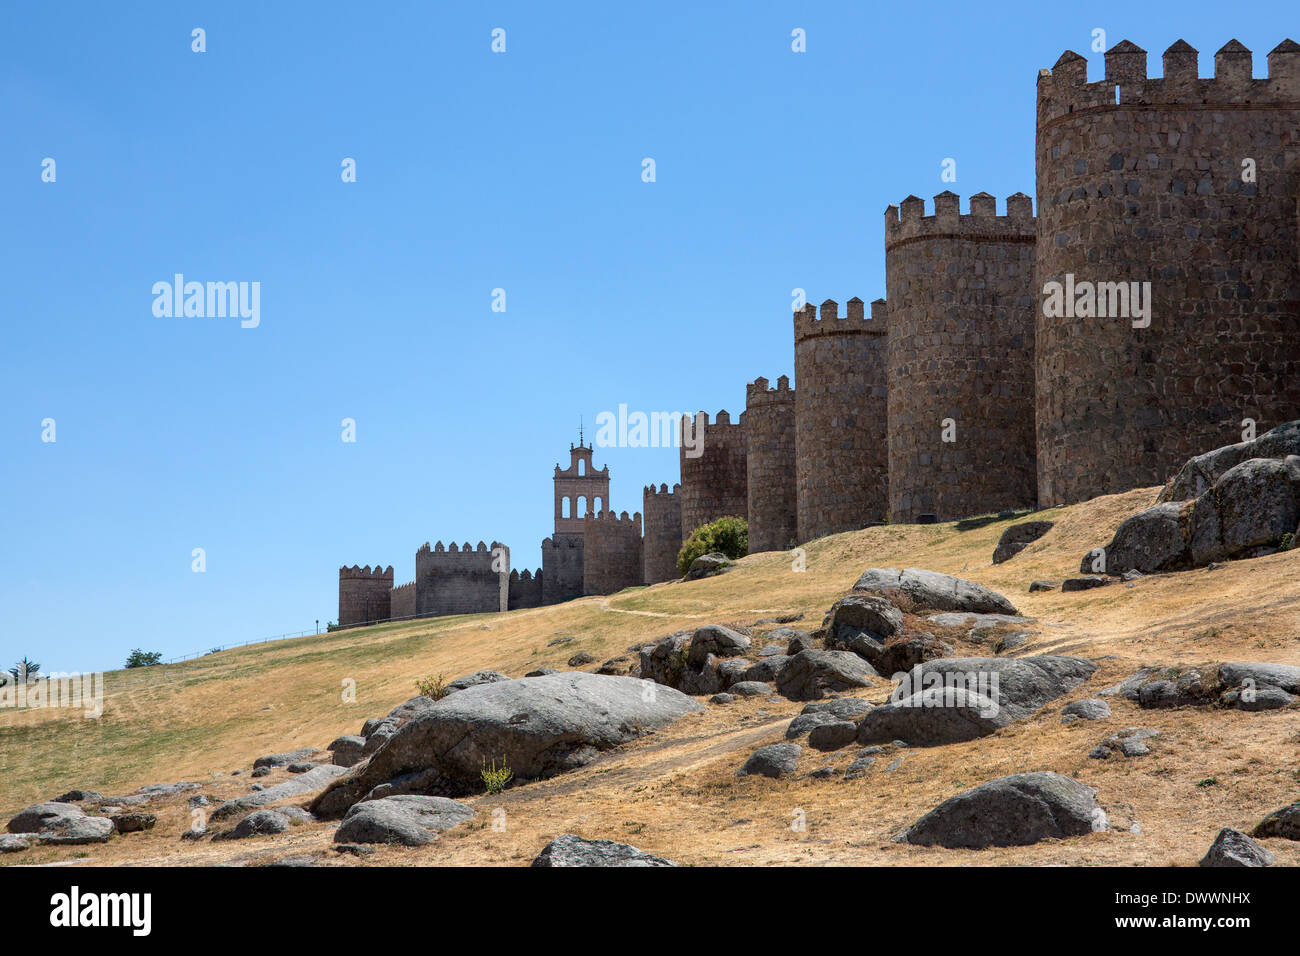 The medieval city walls around the city of Avila in the Castilla-y-Leon region of central Spain. Stock Photo